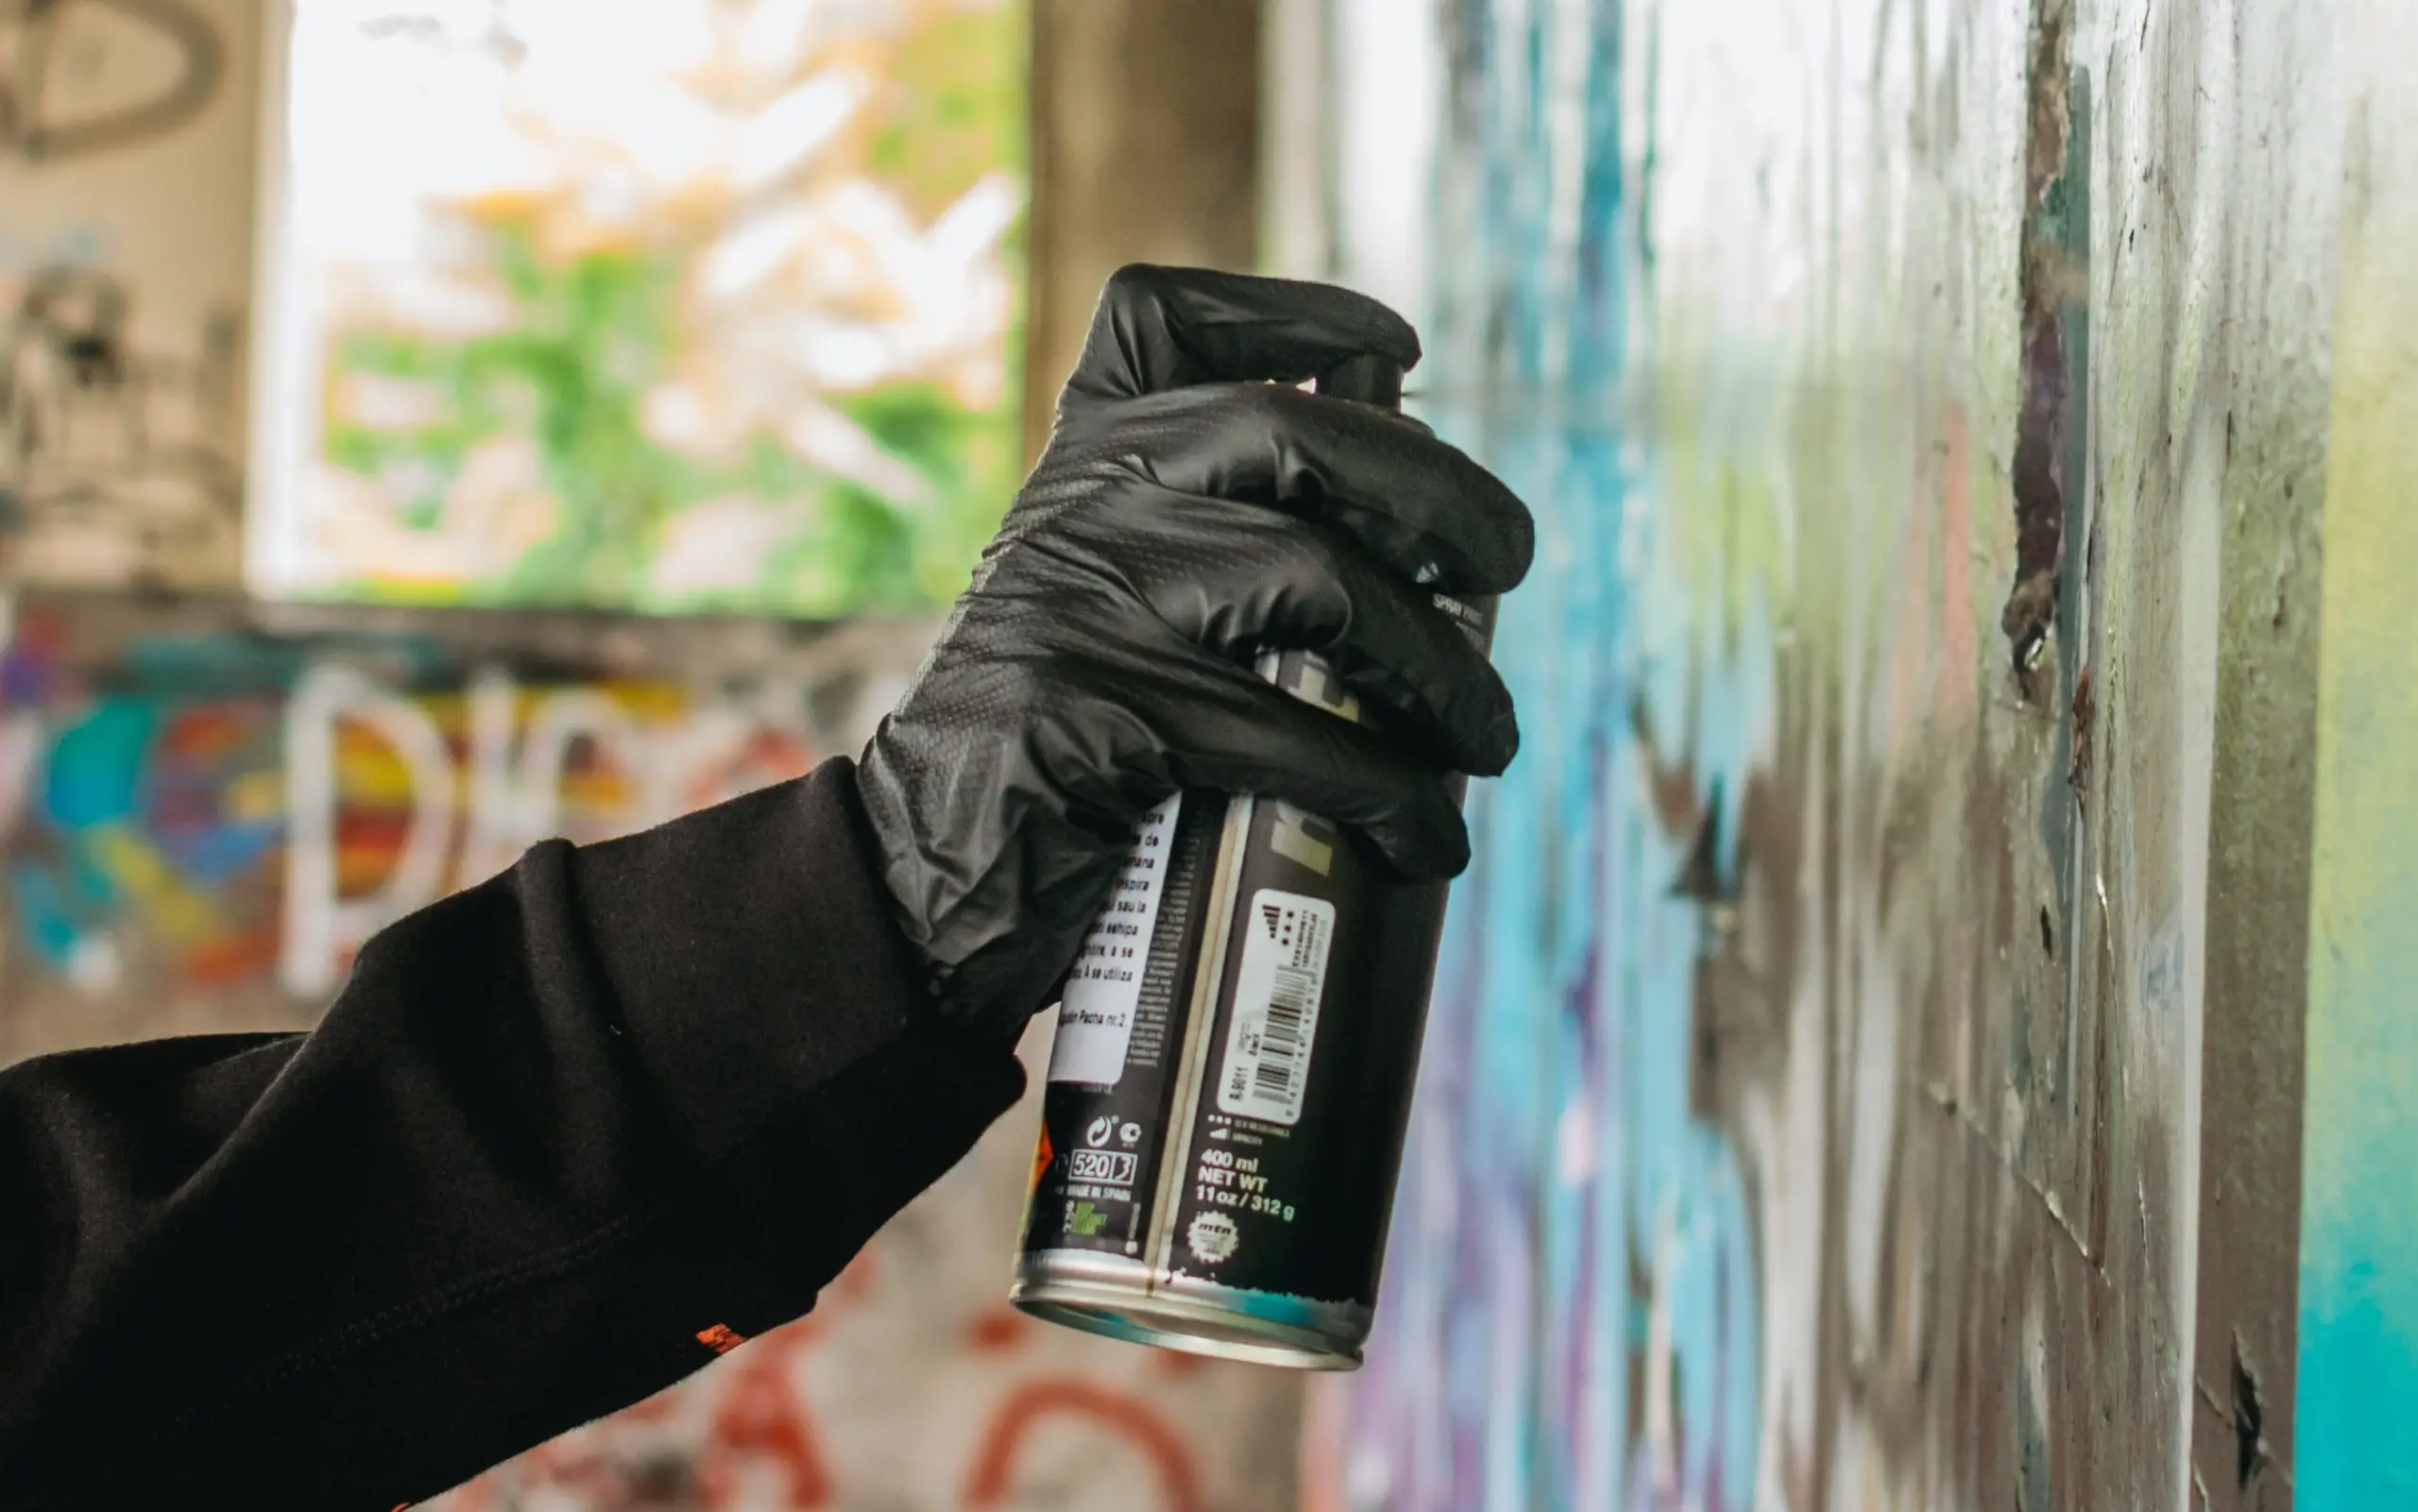 How Much A Can Of Spray Paint Costs?